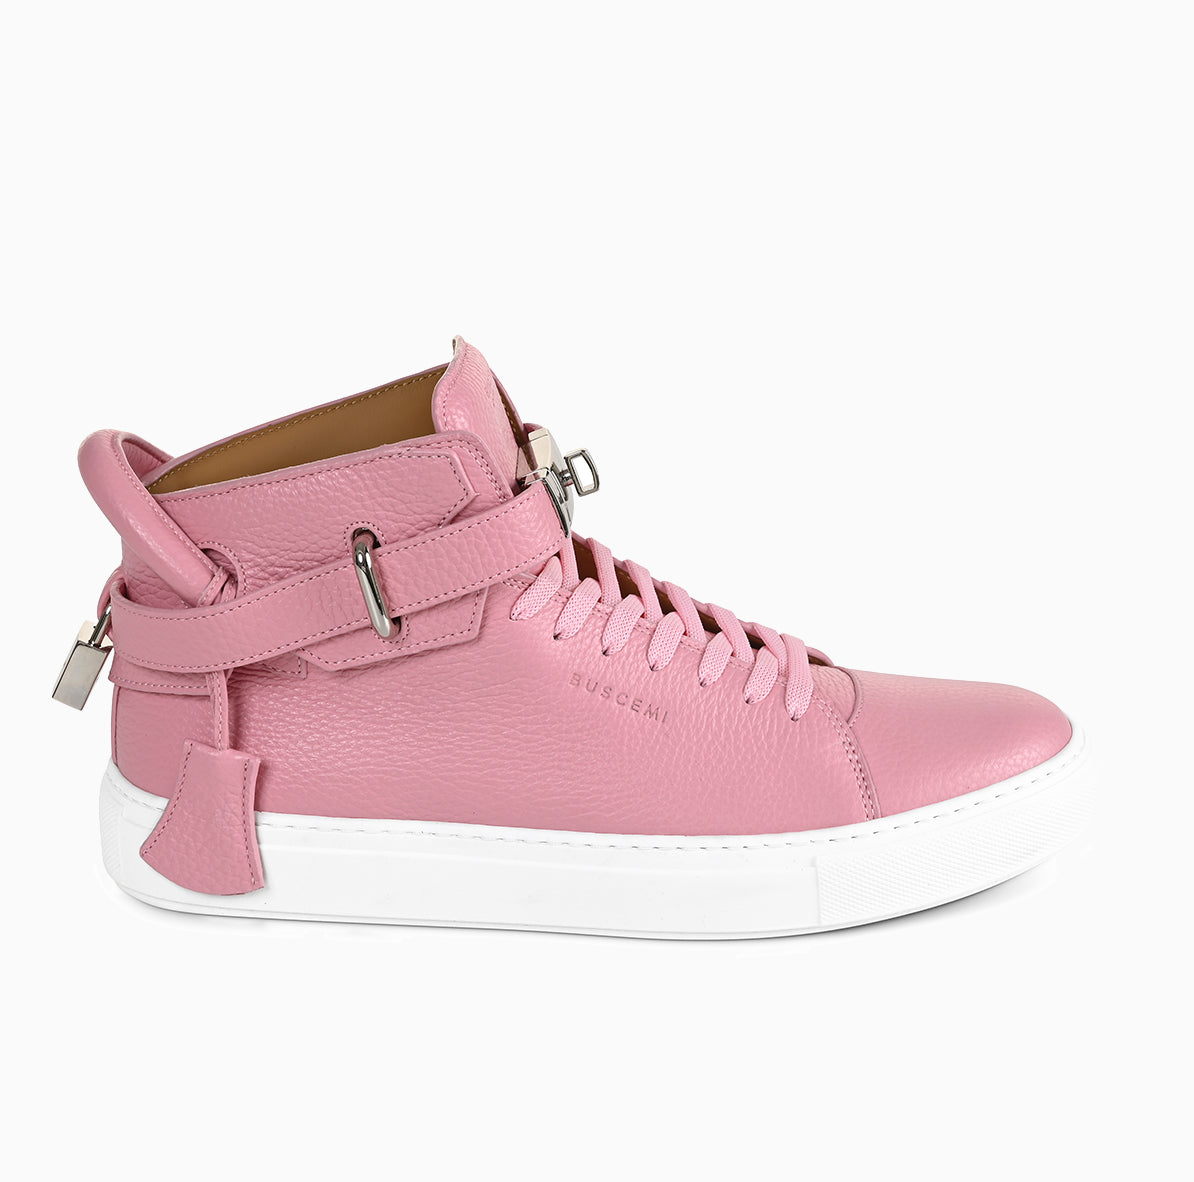 Leather high trainers Buscemi White size 41 EU in Leather - 22425972